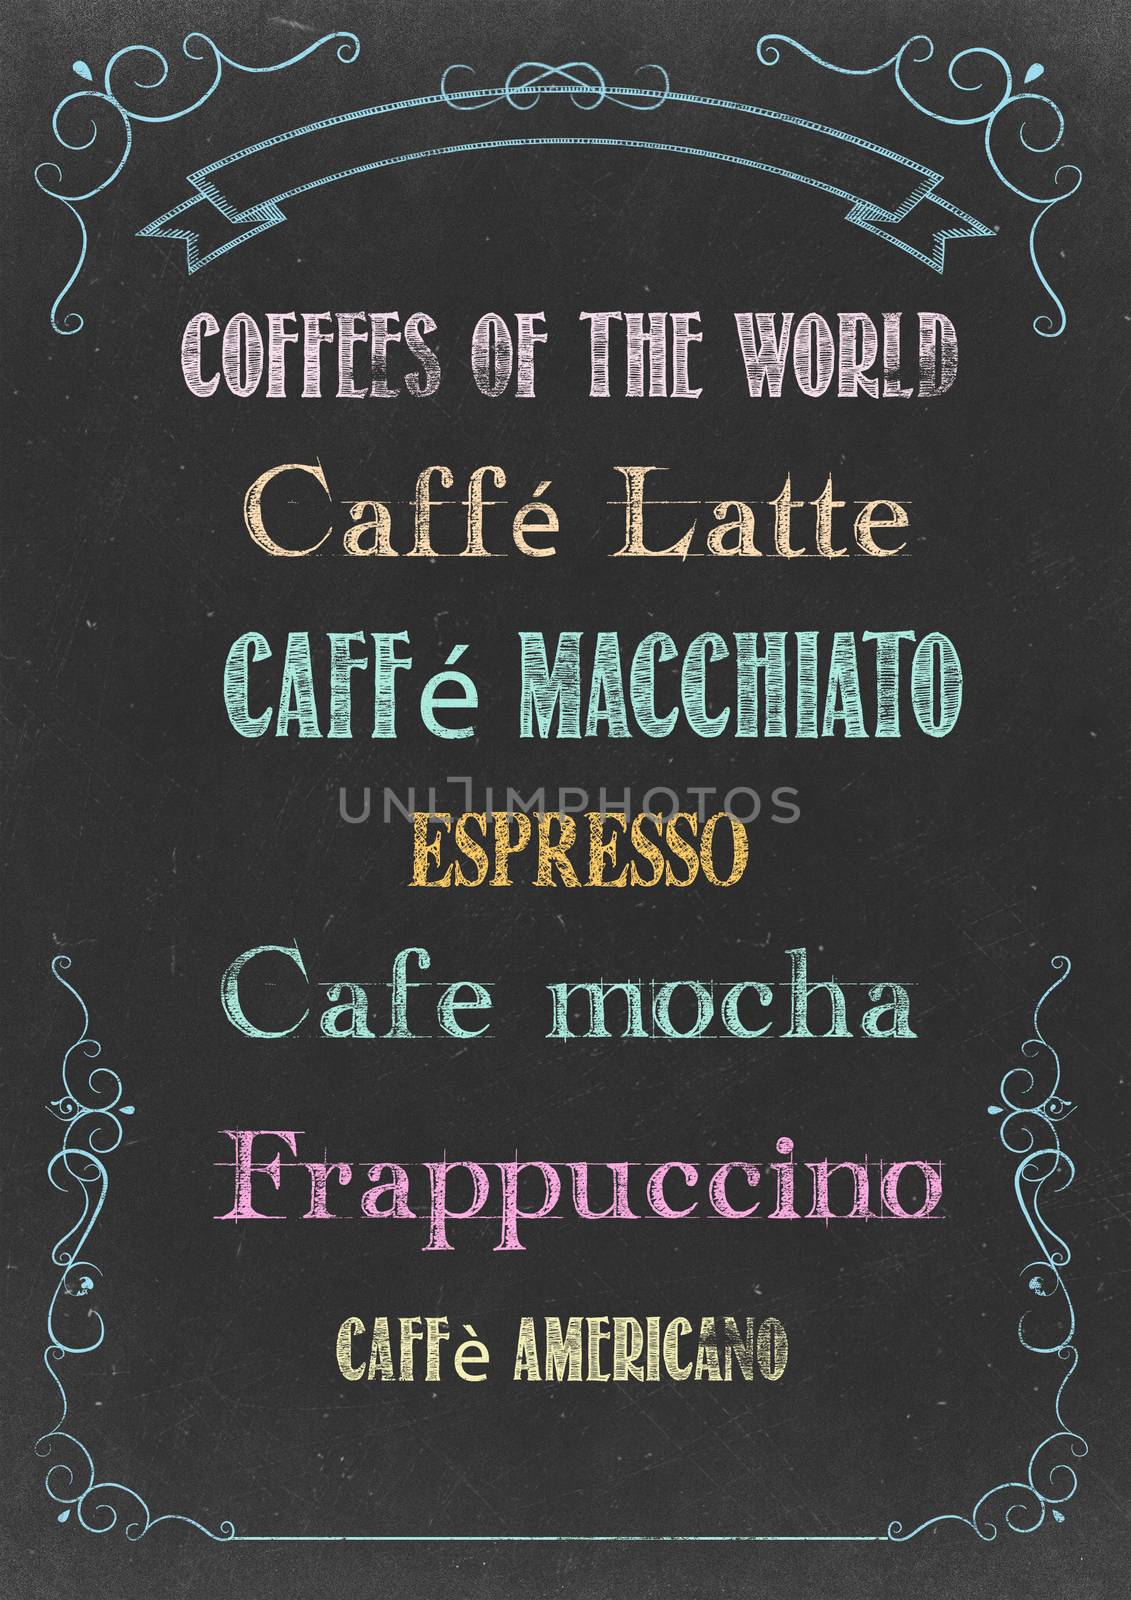 COFFEES OF THE WORLD by urbanbuzz